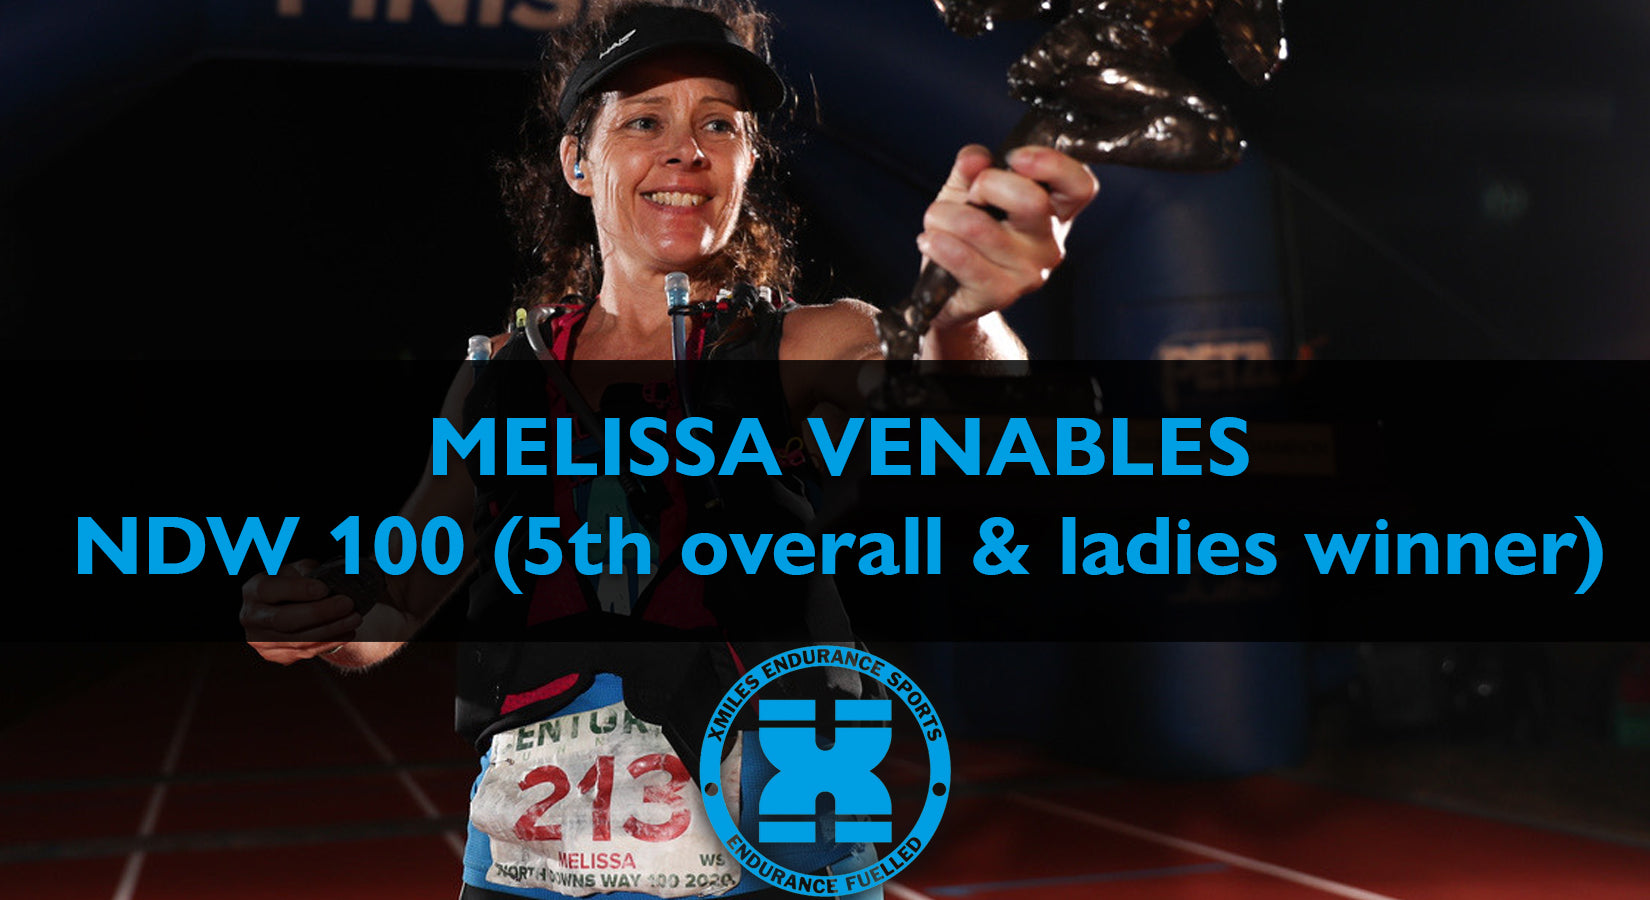 MELISSA VENABLES NDW 100 5TH OVERALL